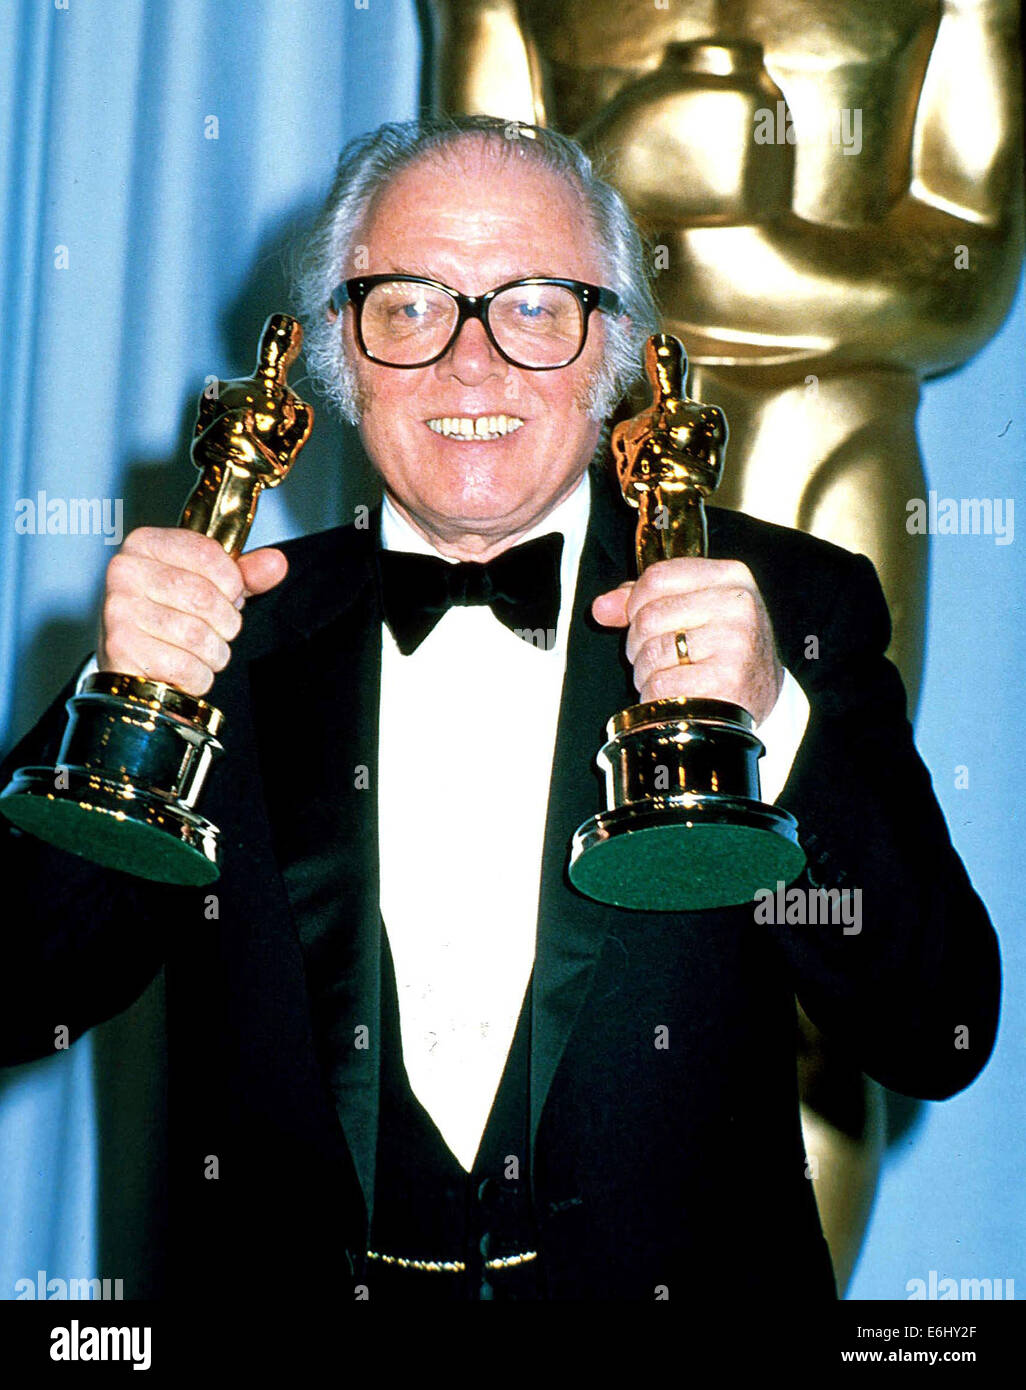 RICHARD ATTENBOROUGH (Aug. 29, 1923 - Aug. 24, 2014) was an English actor, film director, producer and entrepreneur. He was the President of the Royal Academy of Dramatic Art (RADA). He won two Academy Awards as a film director and producer for 'Gandhi' in 1983. He has also won four BAFTA Awards and four Golden Globe Awards. PICTURED: Apr 11, 1983 - Hollywood, California, U.S. - Sir RICHARD ATTENBOROUGH with the two Oscars he won for his film 'Gandhi' in the Press Room during the 55th Academy Awards. © Laszlo Veres/Globe Photos/ZUMAPRESS.com/Alamy Live News Stock Photo